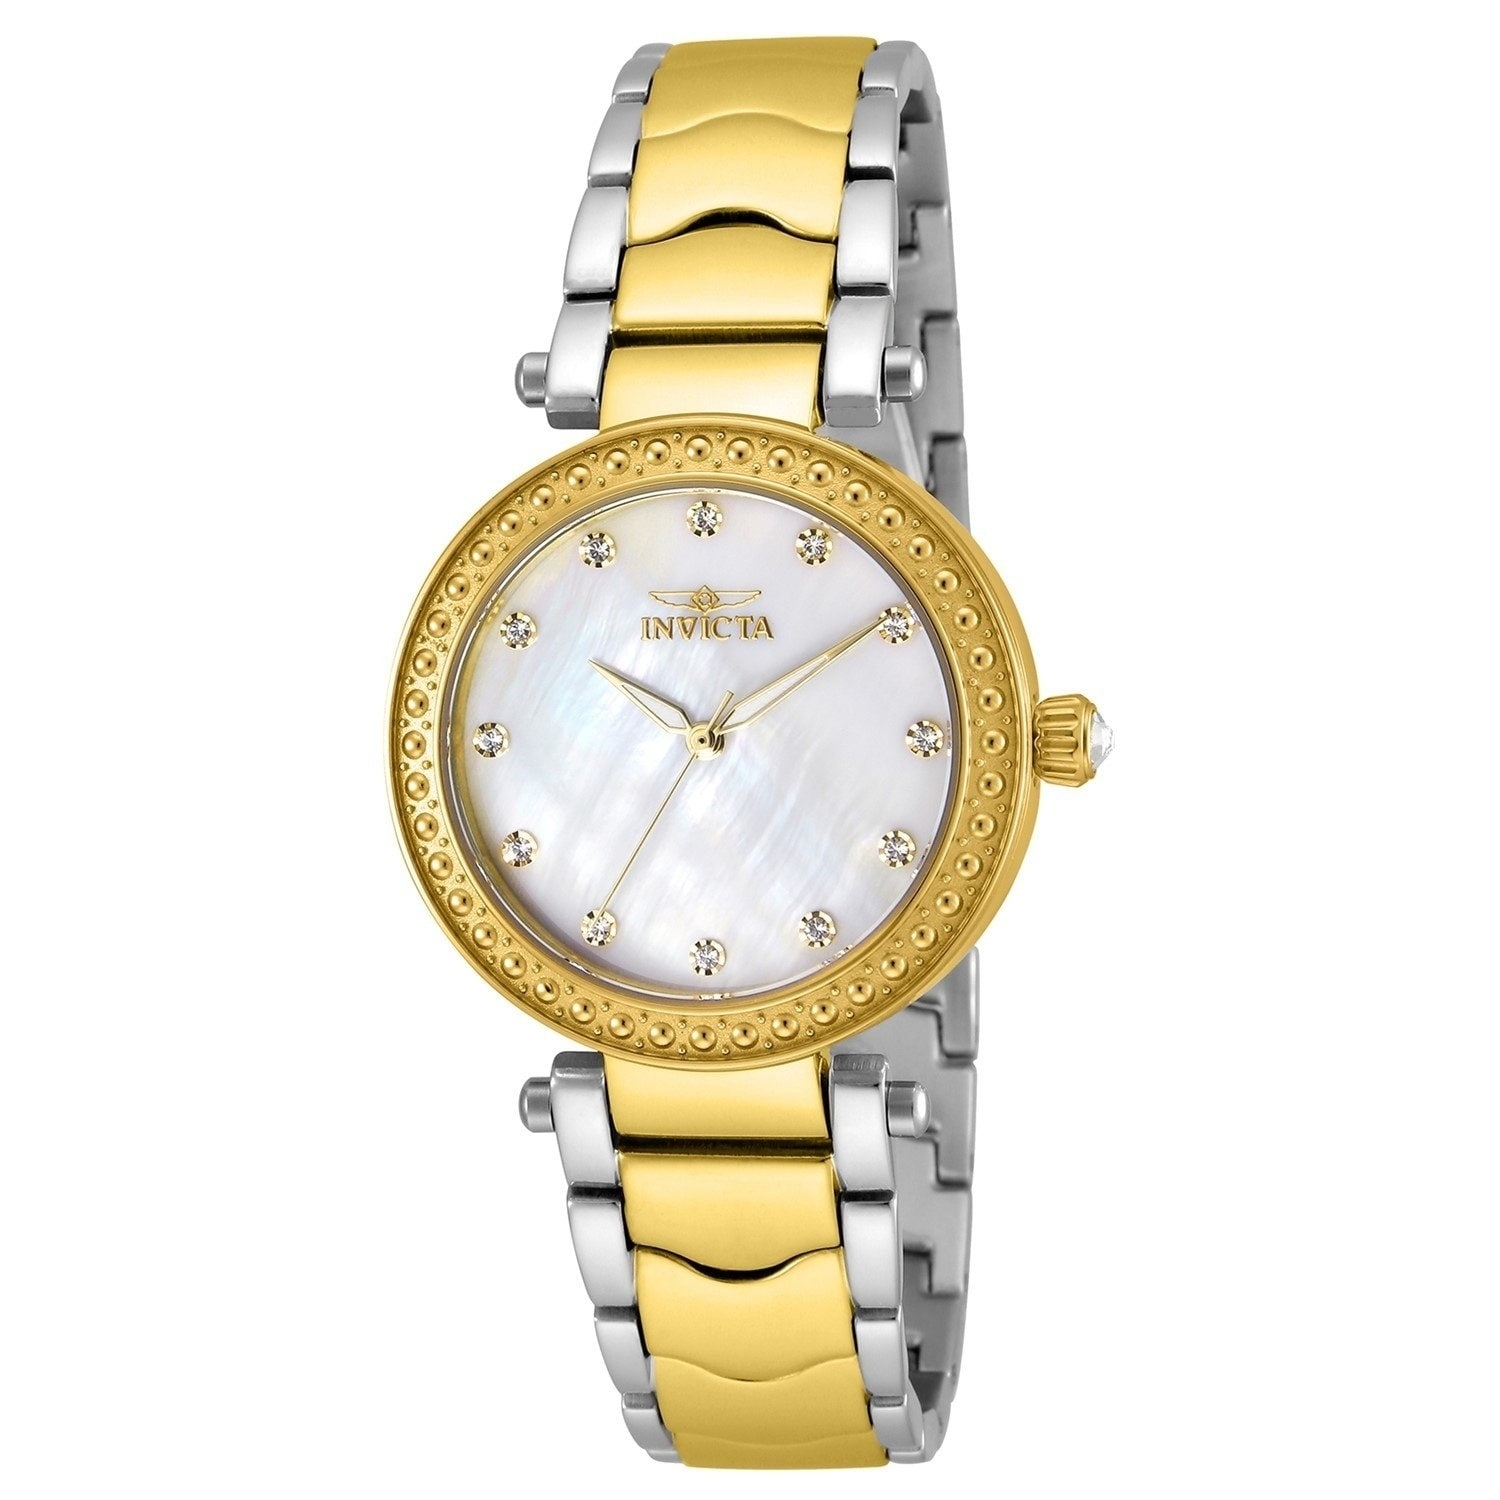 Invicta Women's 23965 'Wildflower' Gold-Tone and Silver Stainless Steel Watch